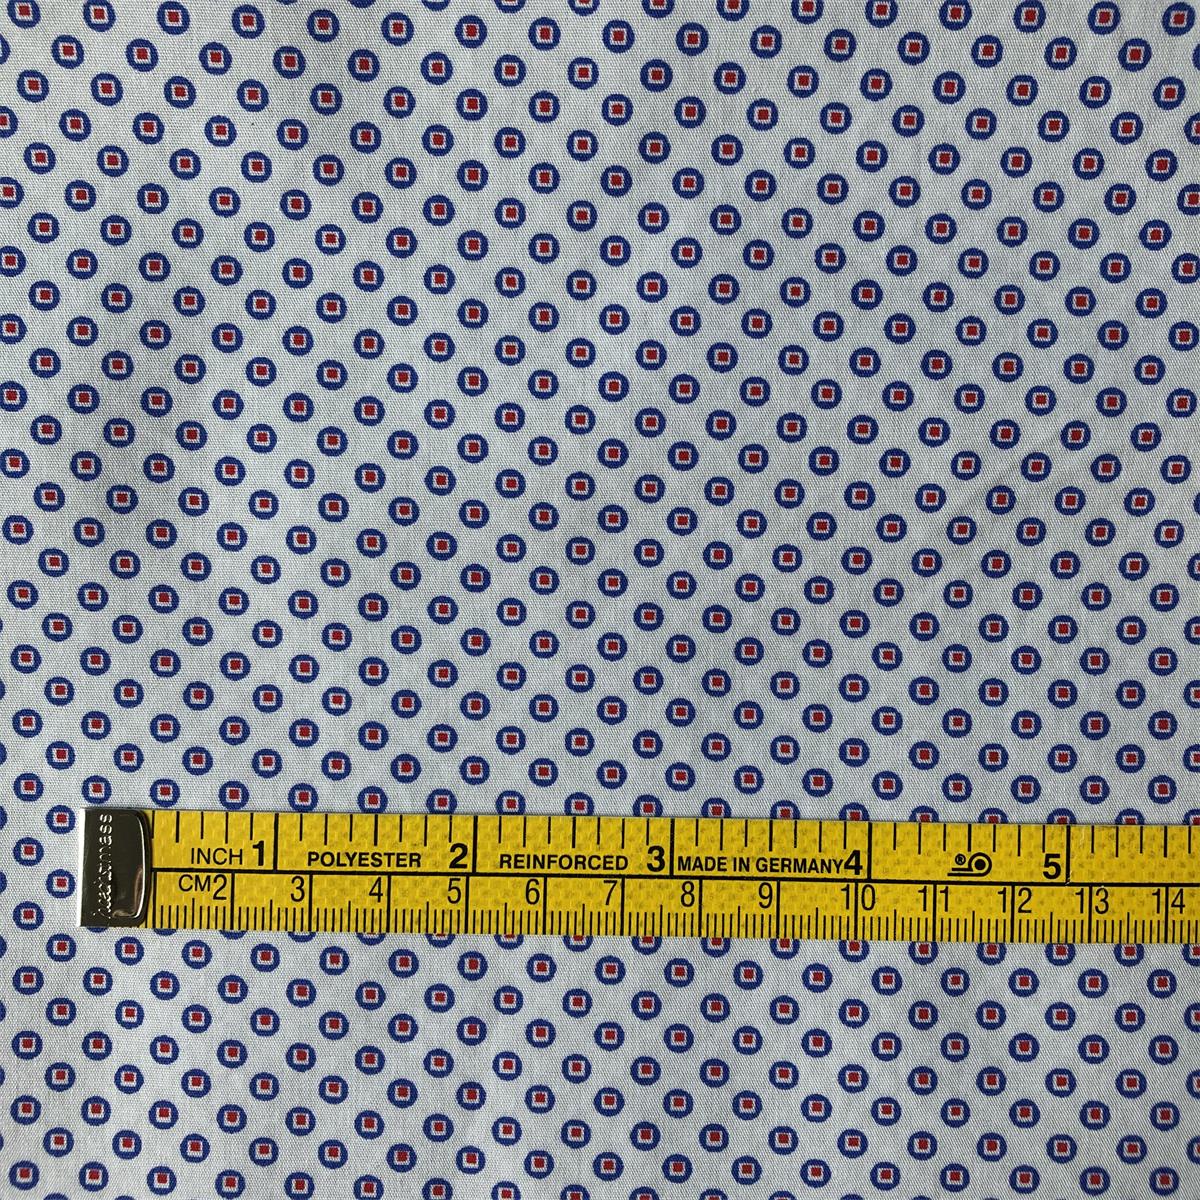 Eco-friendly Textile Cotton Printed fabric for mens shirts 100 cotton poplin printed shirts woven fabric soft comfortable